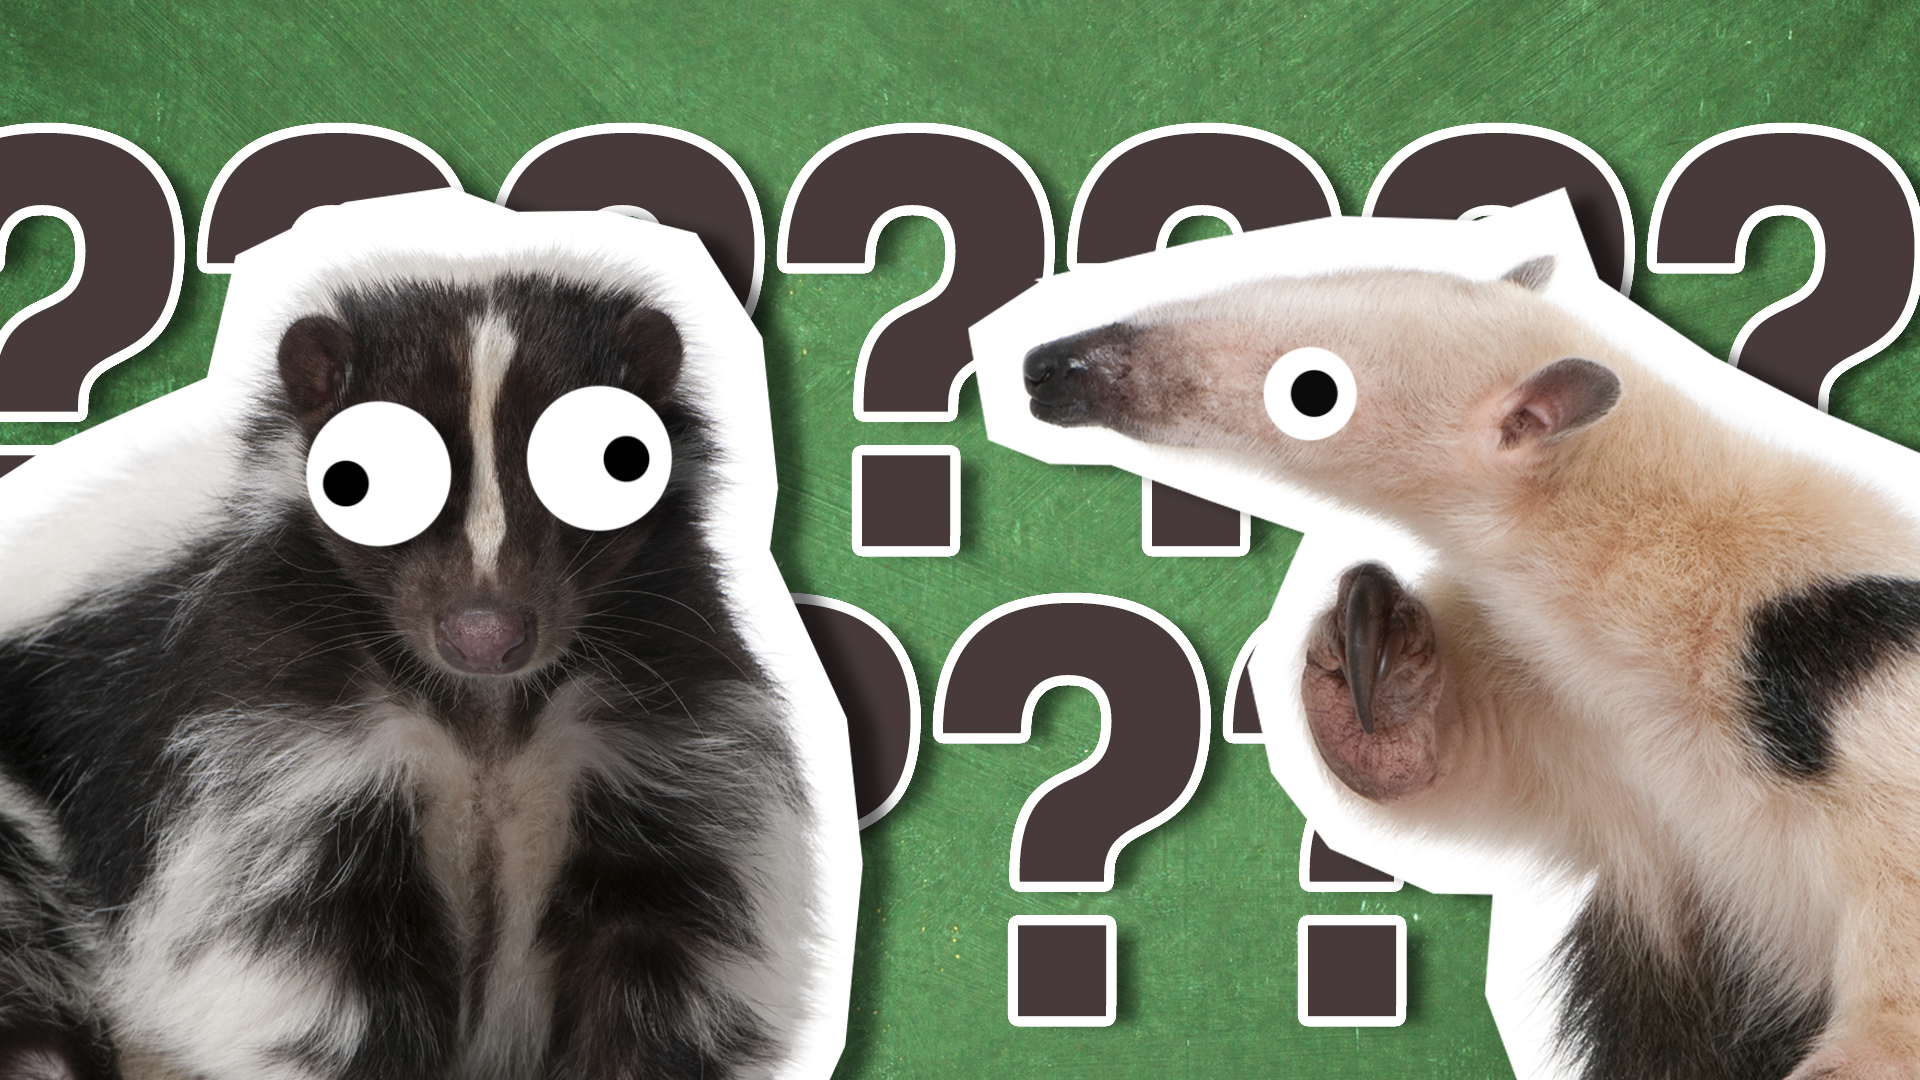 A skunk and a collared anteater